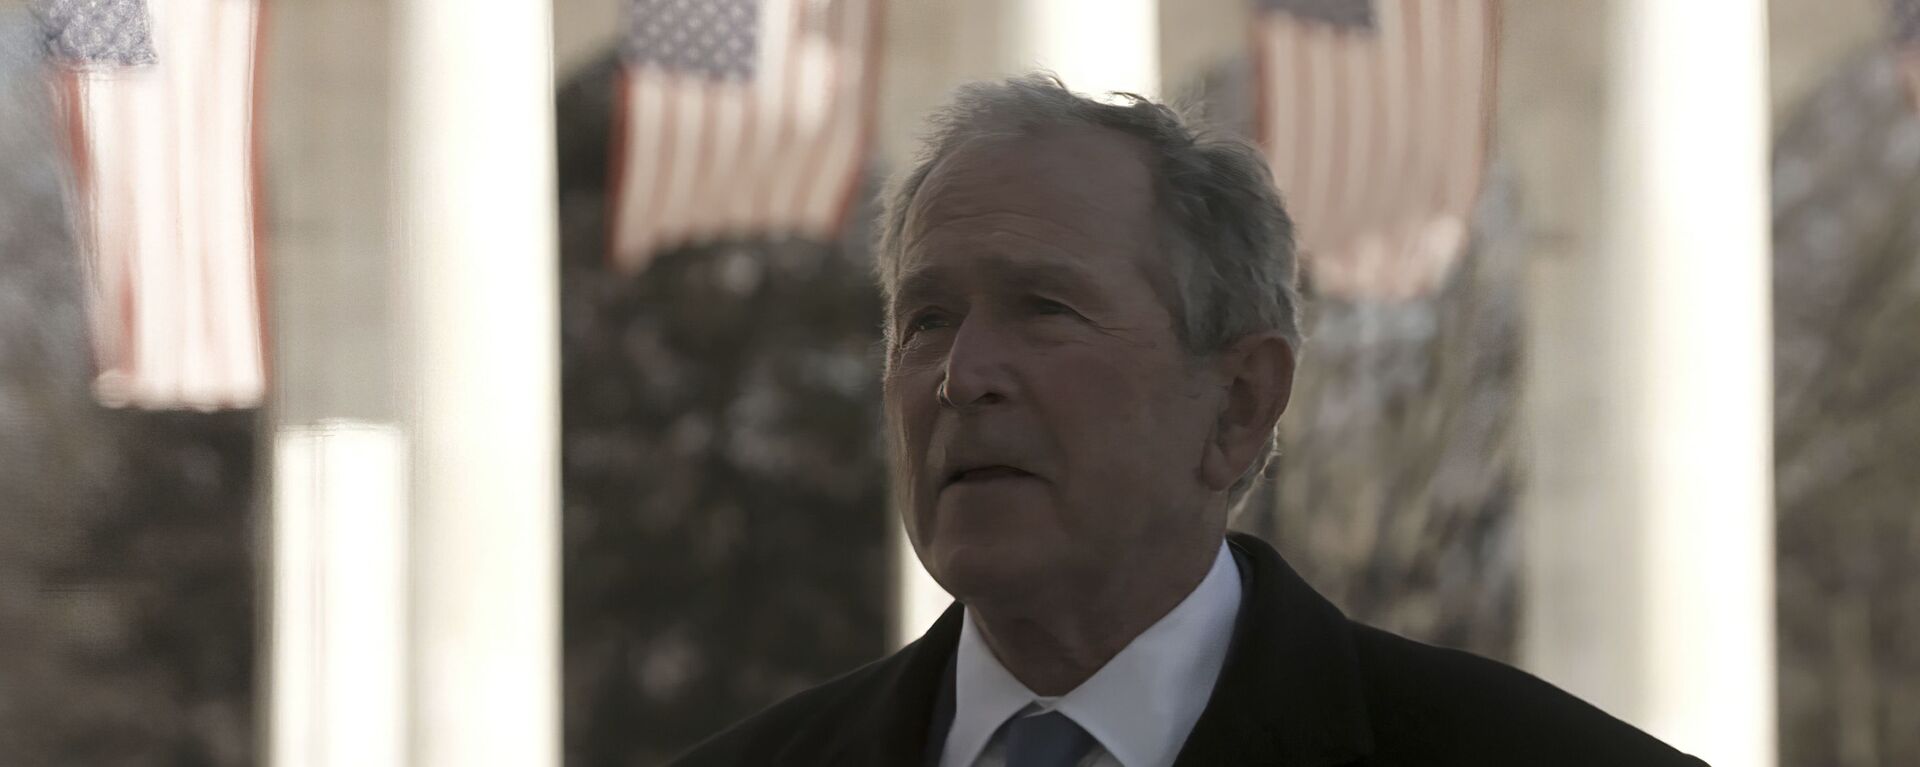 In this image from video, former President George W. Bush speaks during a Celebrating America concert on Wednesday, Jan. 20, 2021, part of the 59th Inauguration Day events for President Joe Biden sworn in as the 46th president of the United States. - Sputnik International, 1920, 14.07.2021